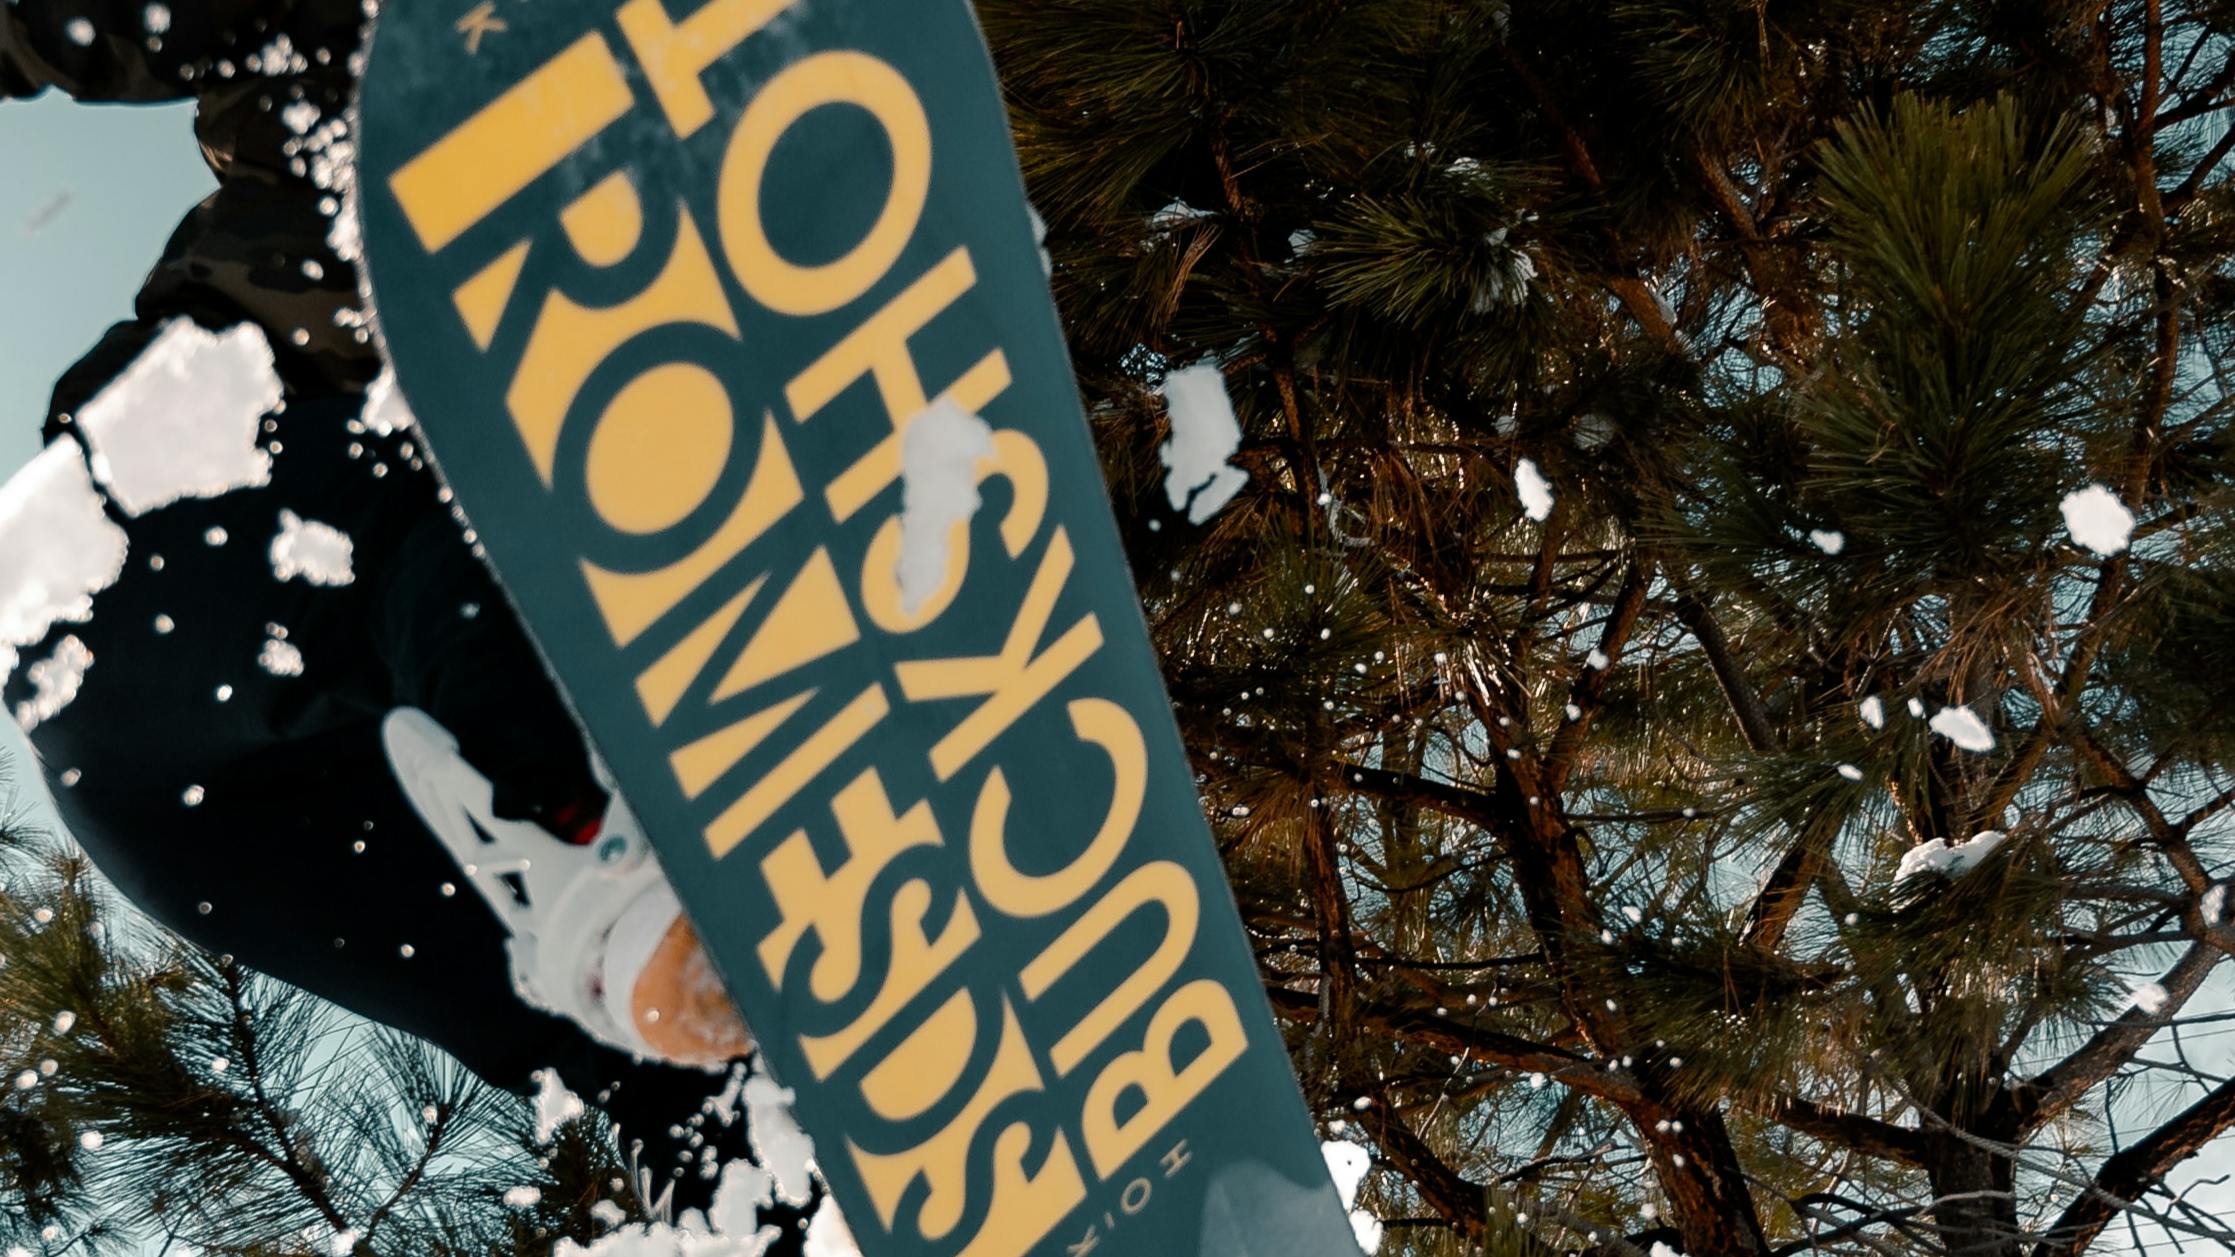 A snowboarder jumping where all you can see are trees and the base of his snowboard which says "Rome Buckshot."